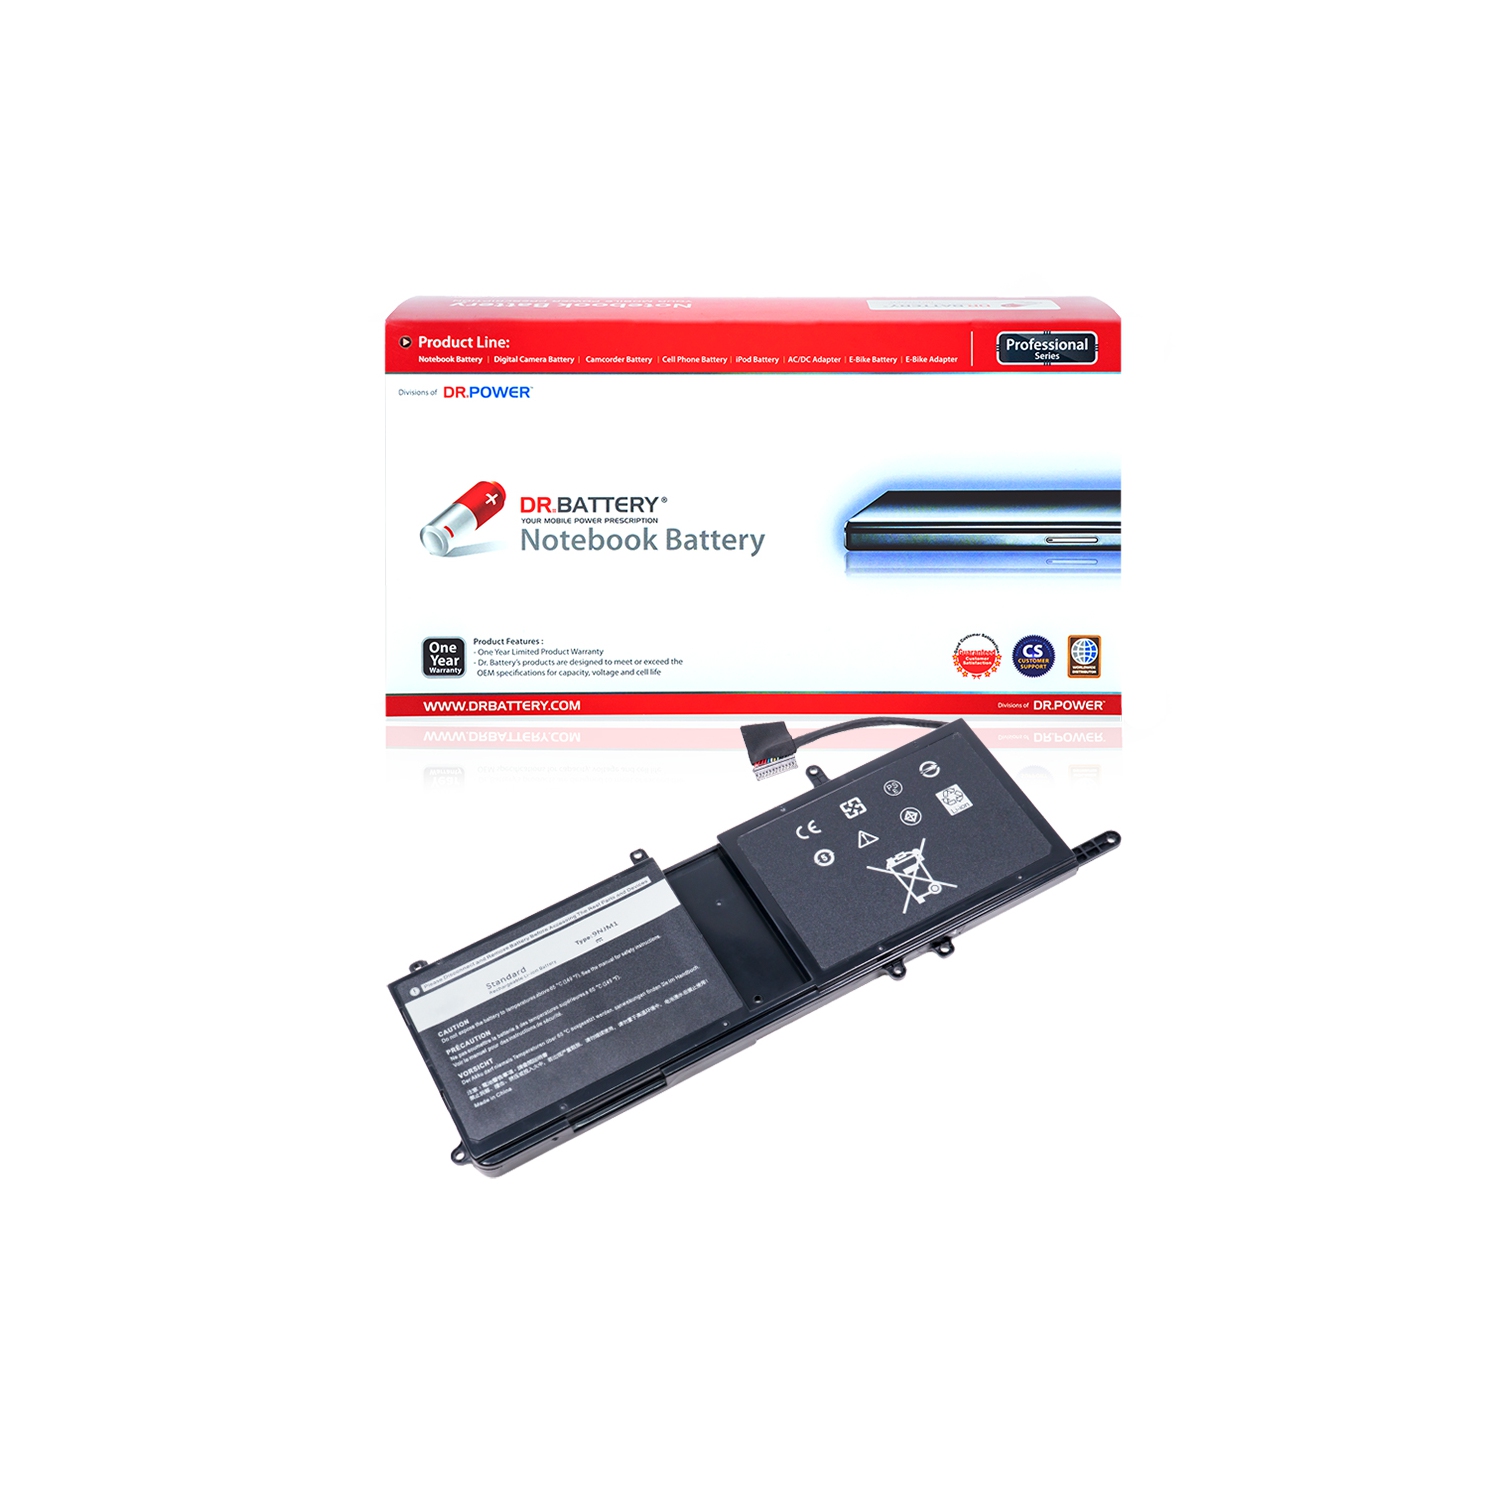 DR. BATTERY - Replacement for Dell Alienware 15 R4 / 17 ALW17C-D3736S / 17 ALW17C-D3738QB / 01D82 / 0546FF / 0HF250 / 0MG2YH